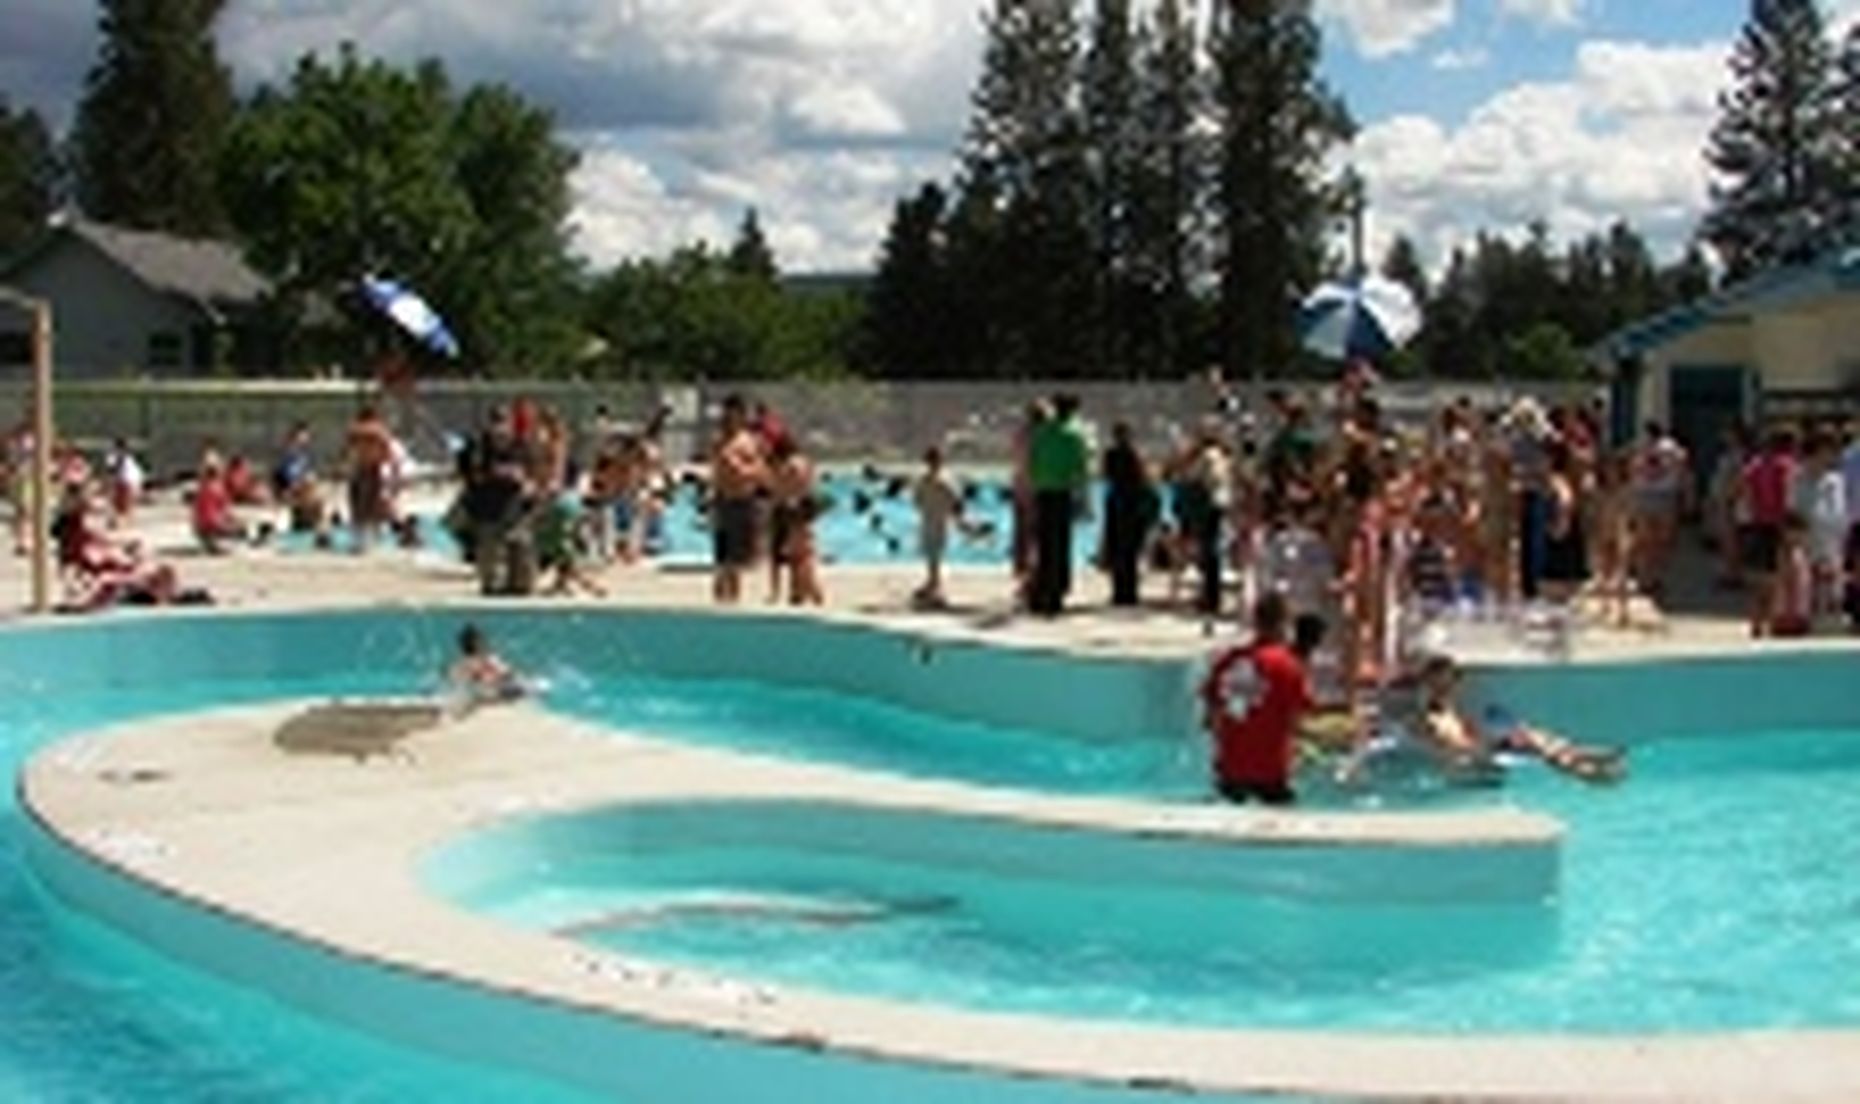 Terrace View Pool Stay Cool In Spokane Area Pools Local Guides The Spokesman Review